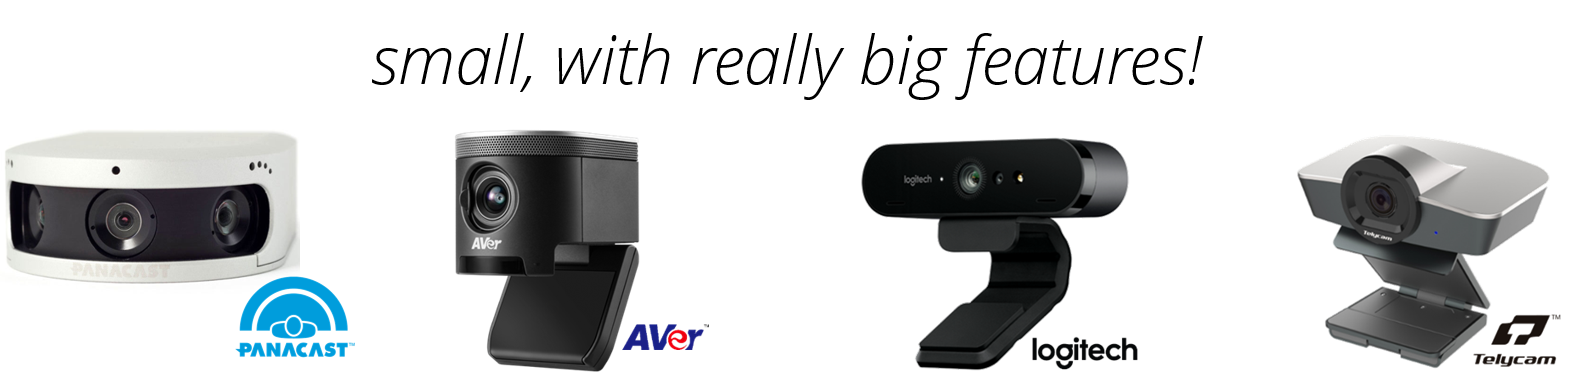 Let's get personal: small office video cameras with big features